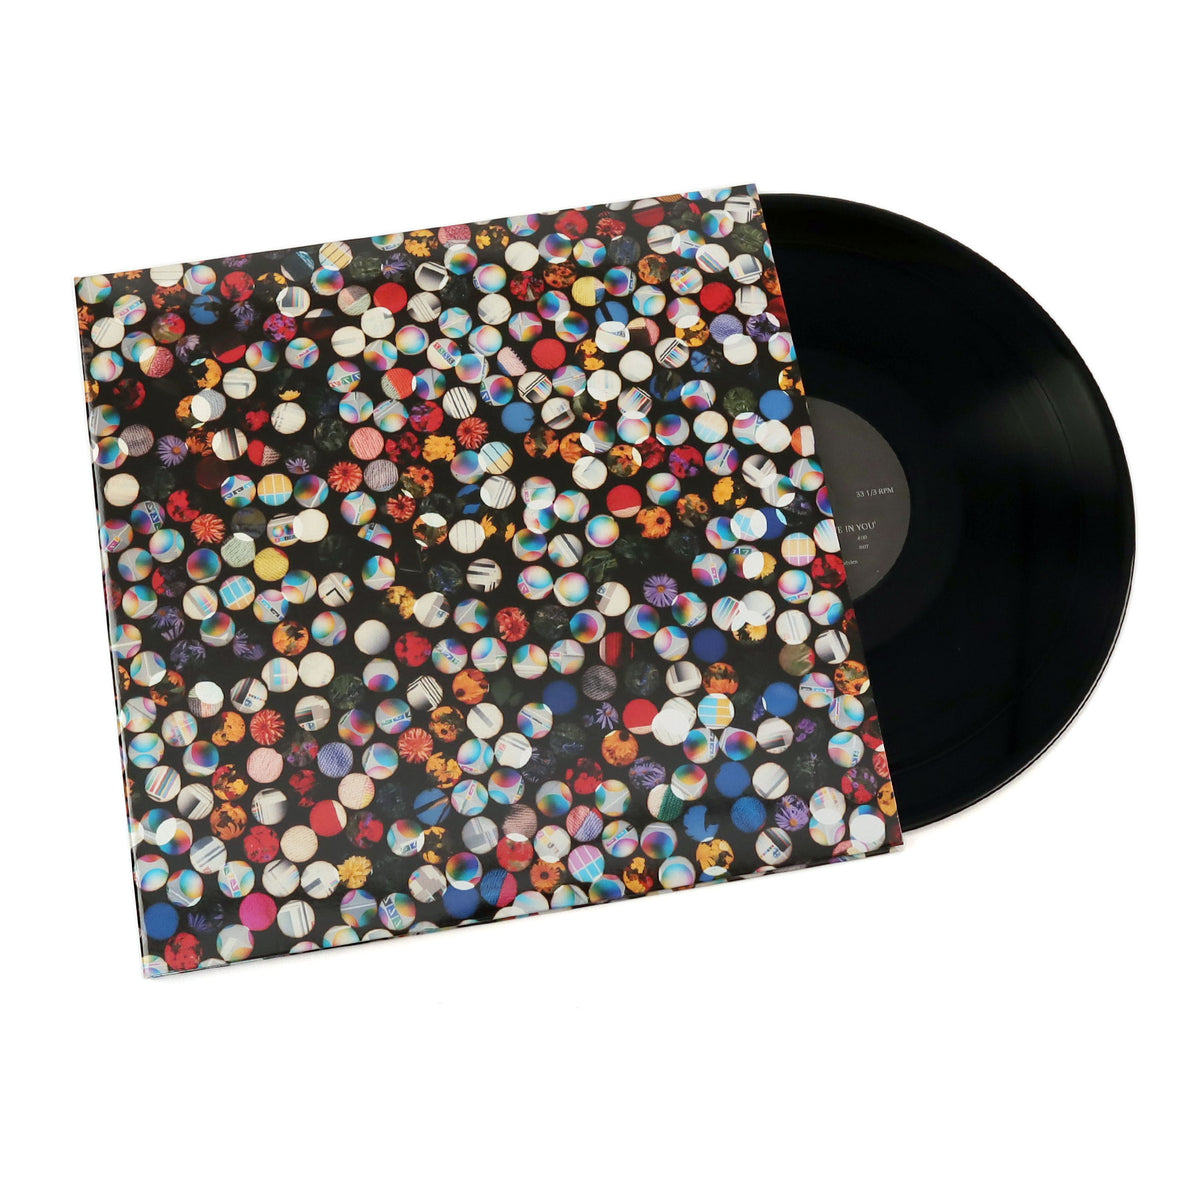 Four Tet: There Love In You Vinyl 2LP TurntableLab.com